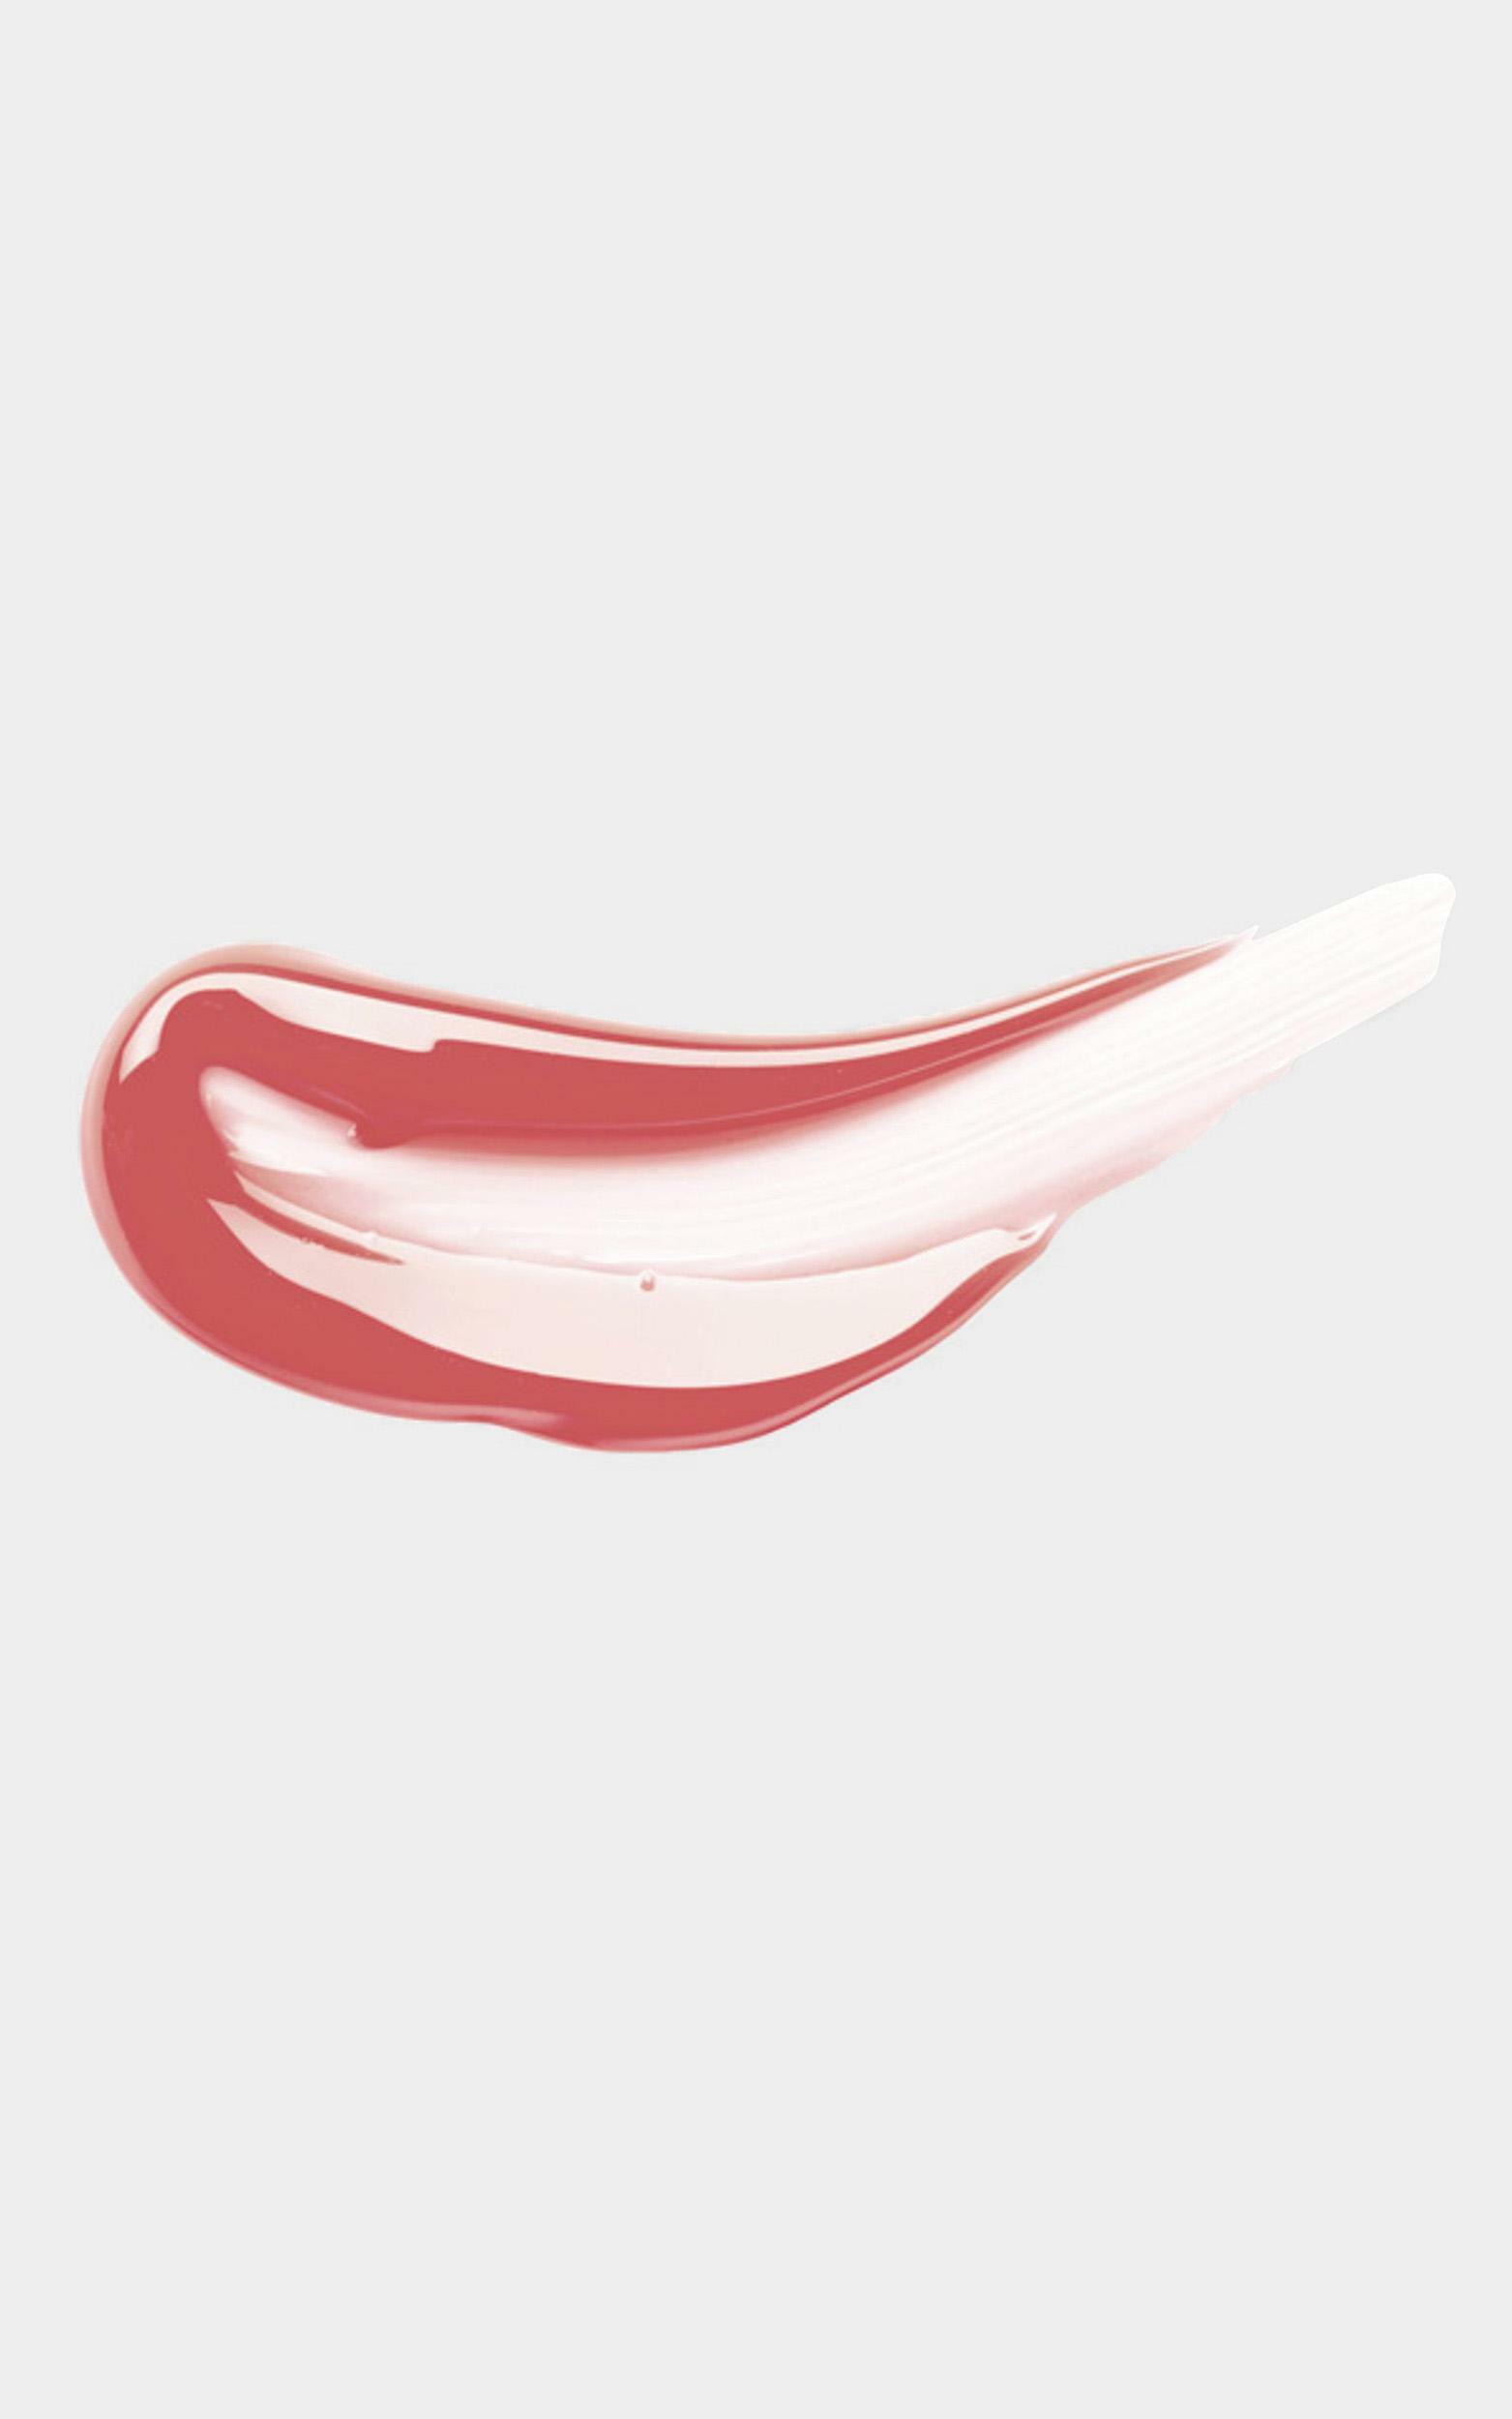 Modelco - Lip Lacquer in Pink, PNK1, hi-res image number null